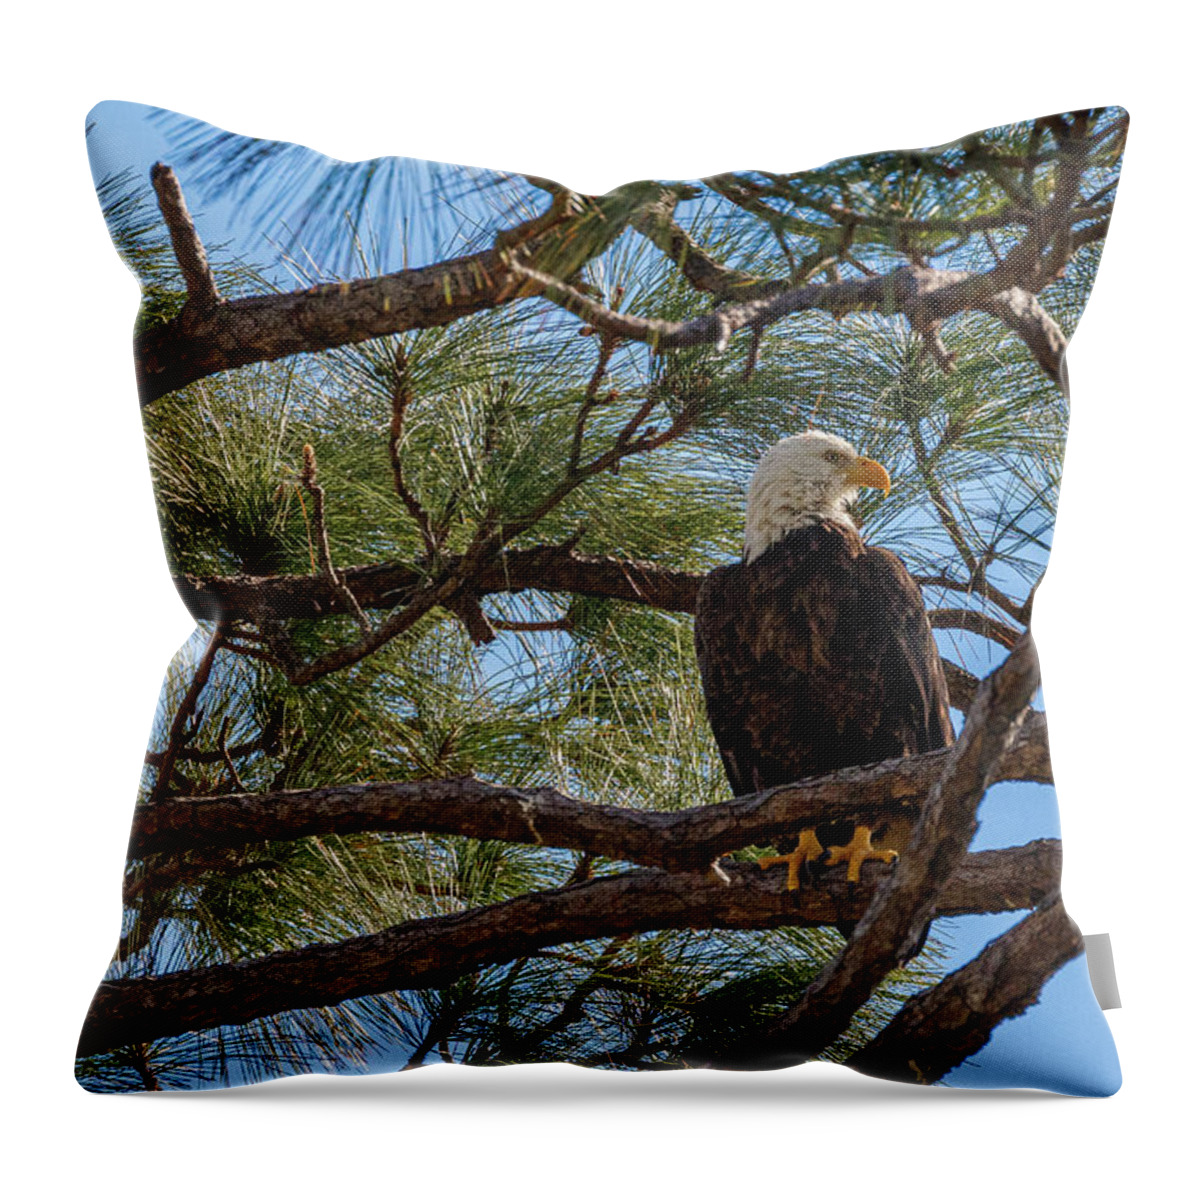 Bird Throw Pillow featuring the photograph 1262 by Les Greenwood